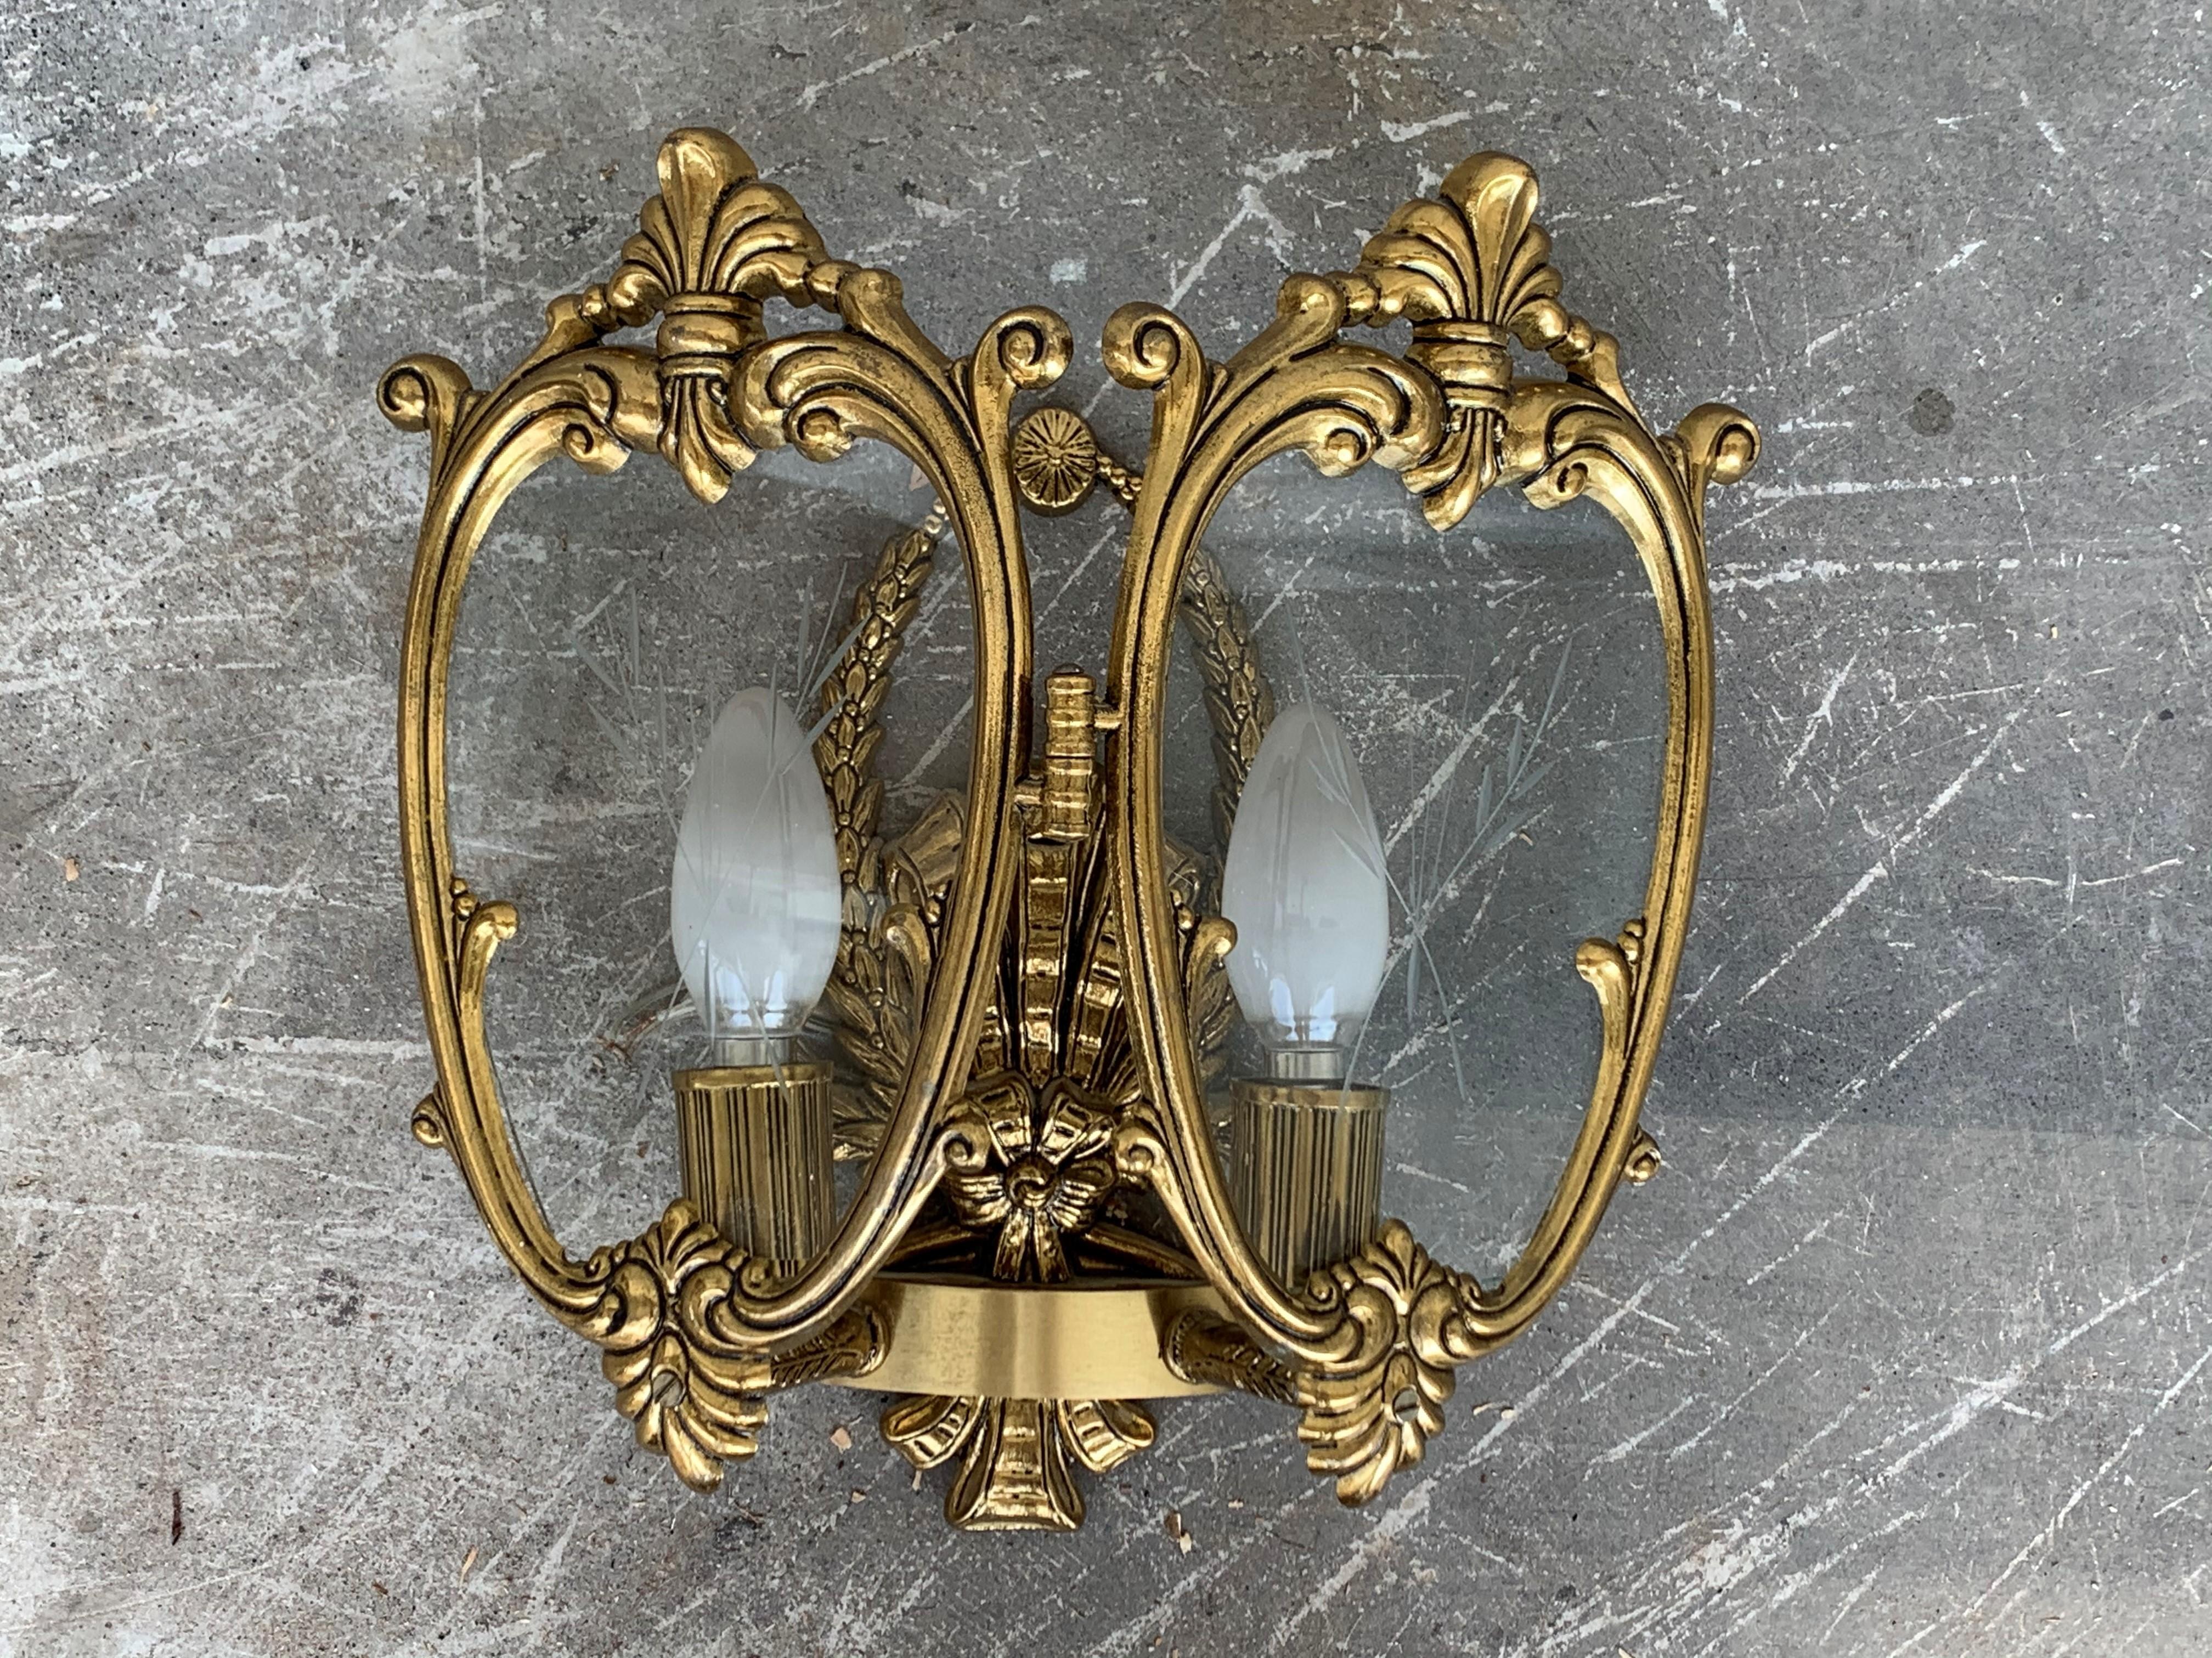 20th set of pair French bronze and glass sconces with ceiling lamp

Sconces measurements:
H 11.81in
W 11.81in
D 3.93in

Ceiling lamp measurements;
H 22.44in
W 8.66in
D 8.66in.